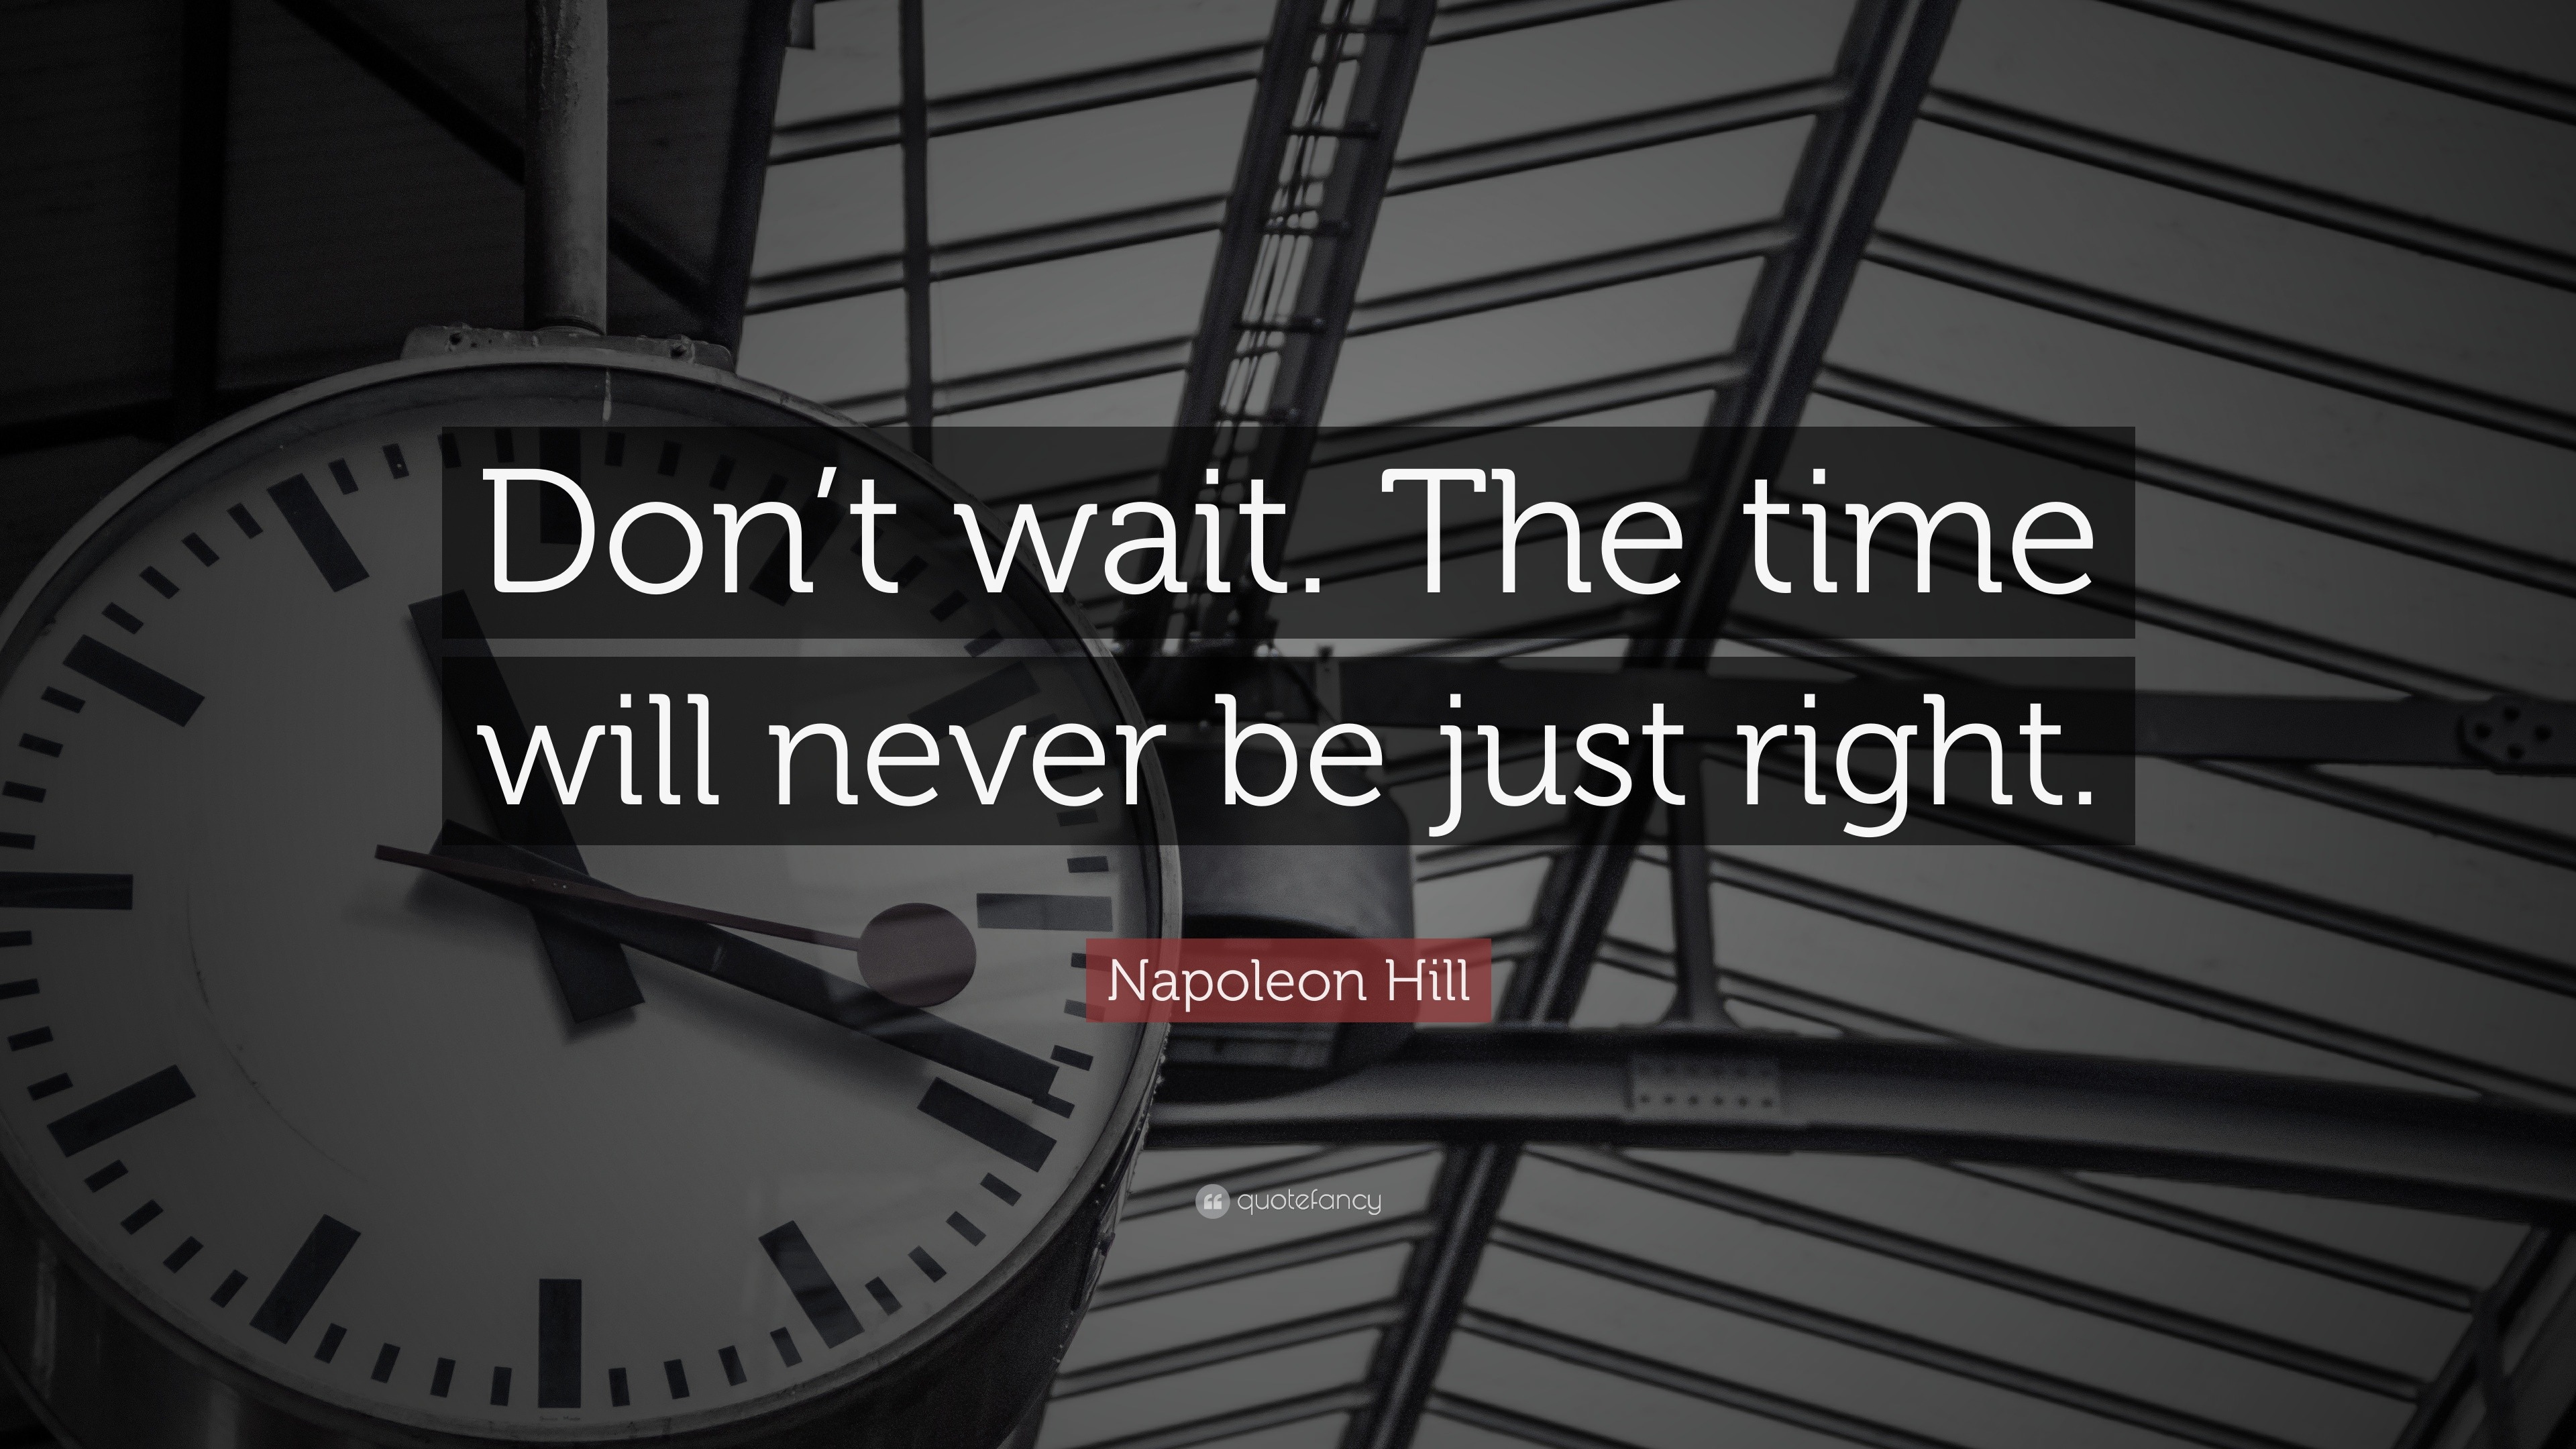 Change Quotes “Don t wait The time will never be just right